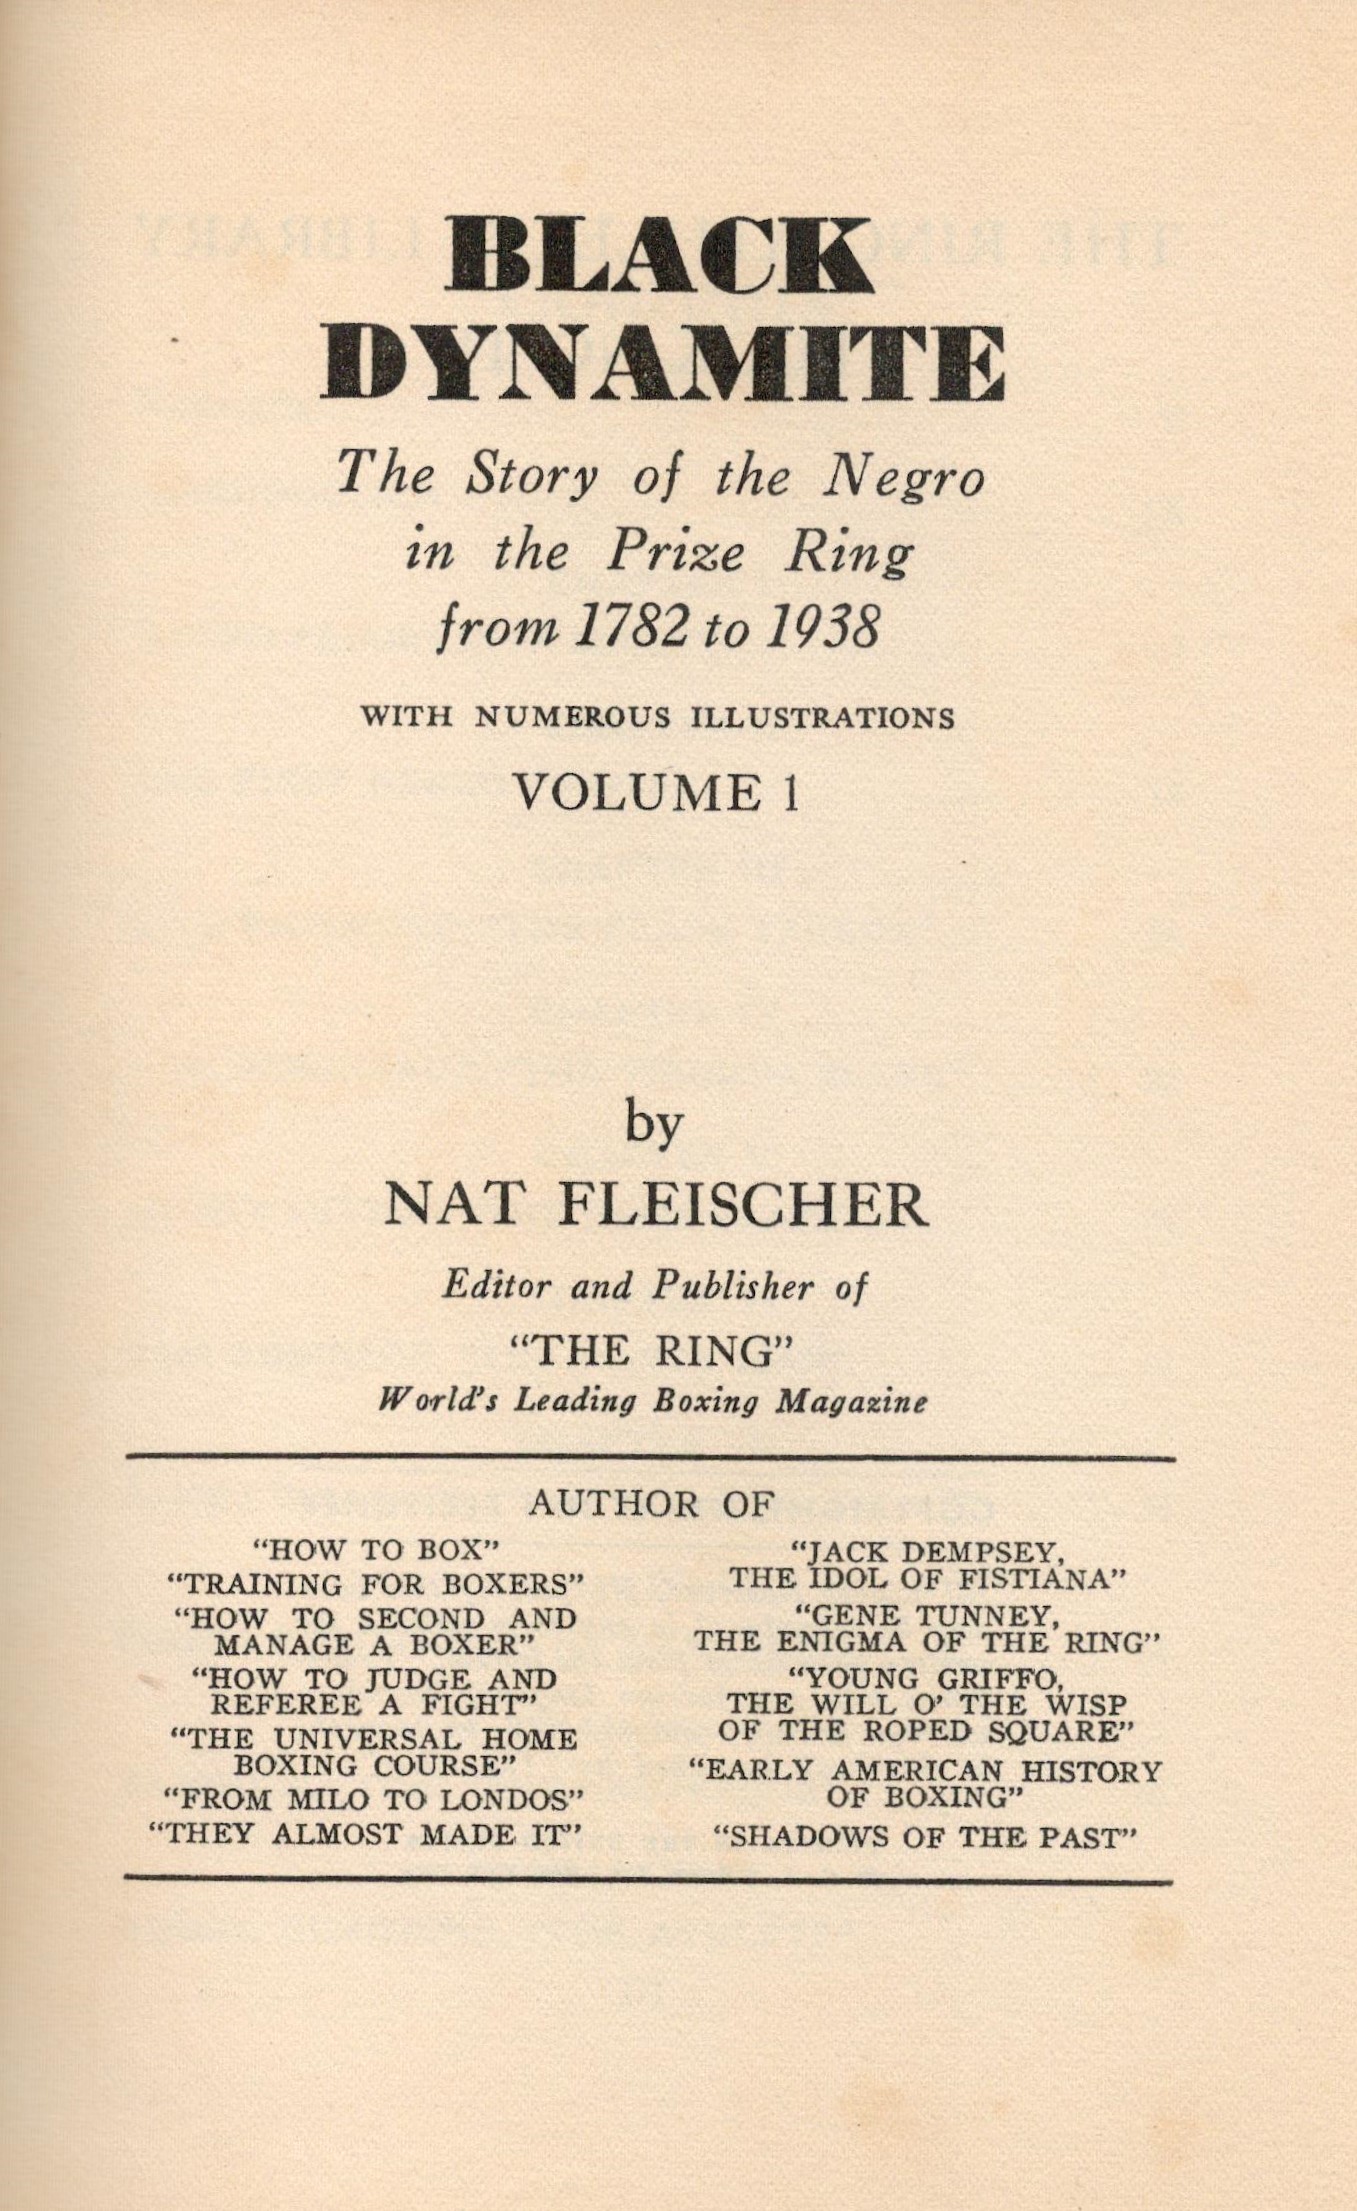 Black Dynamite - Story of the Negro in Boxing vol 1 by Nat Fleischer 1938 First Edition Hardback - Image 2 of 3